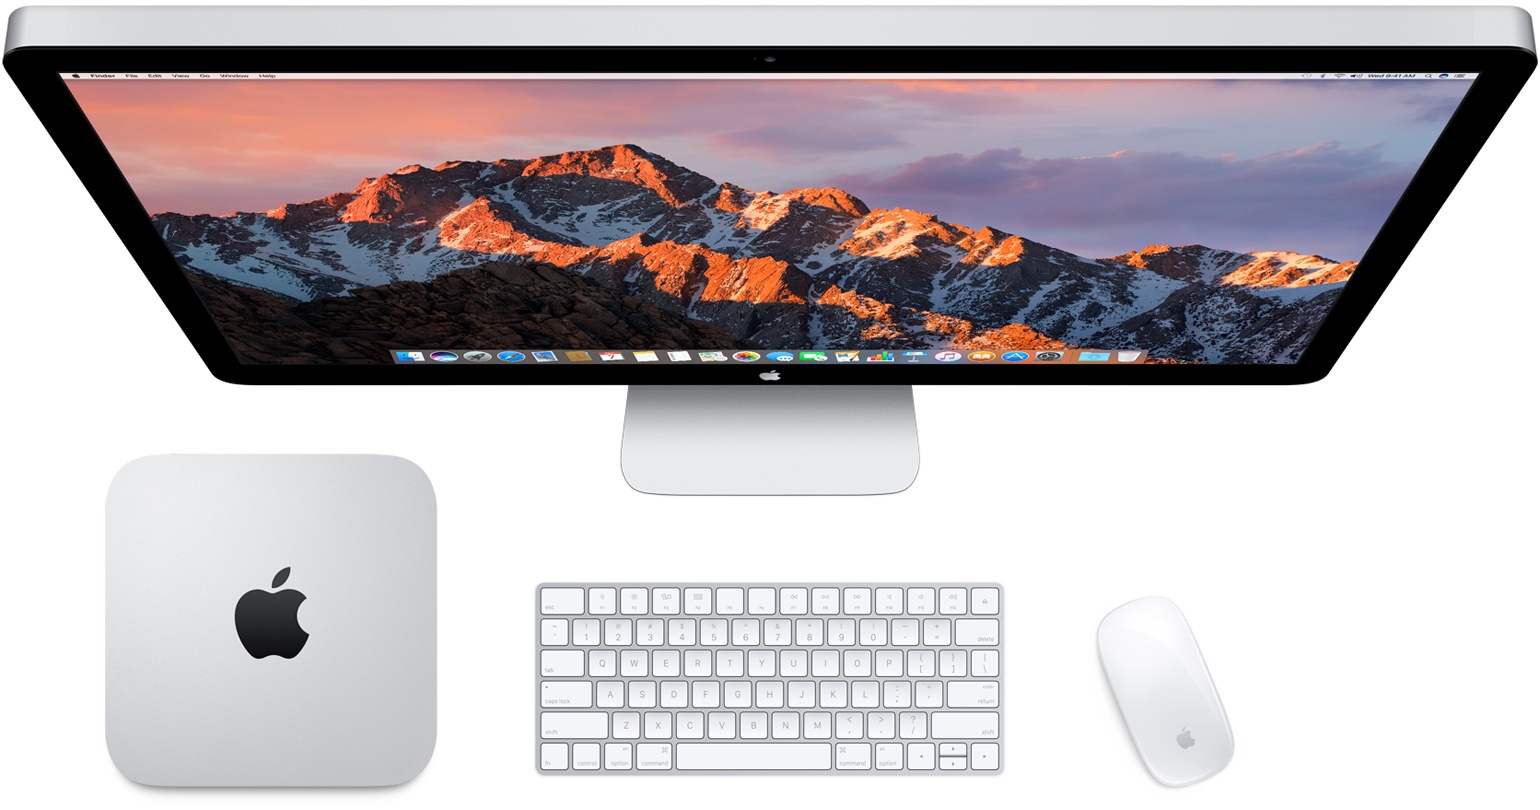 An image depicting an overhead view of an iMac along with a Mac mini, Apple wireless keyboard and mouse